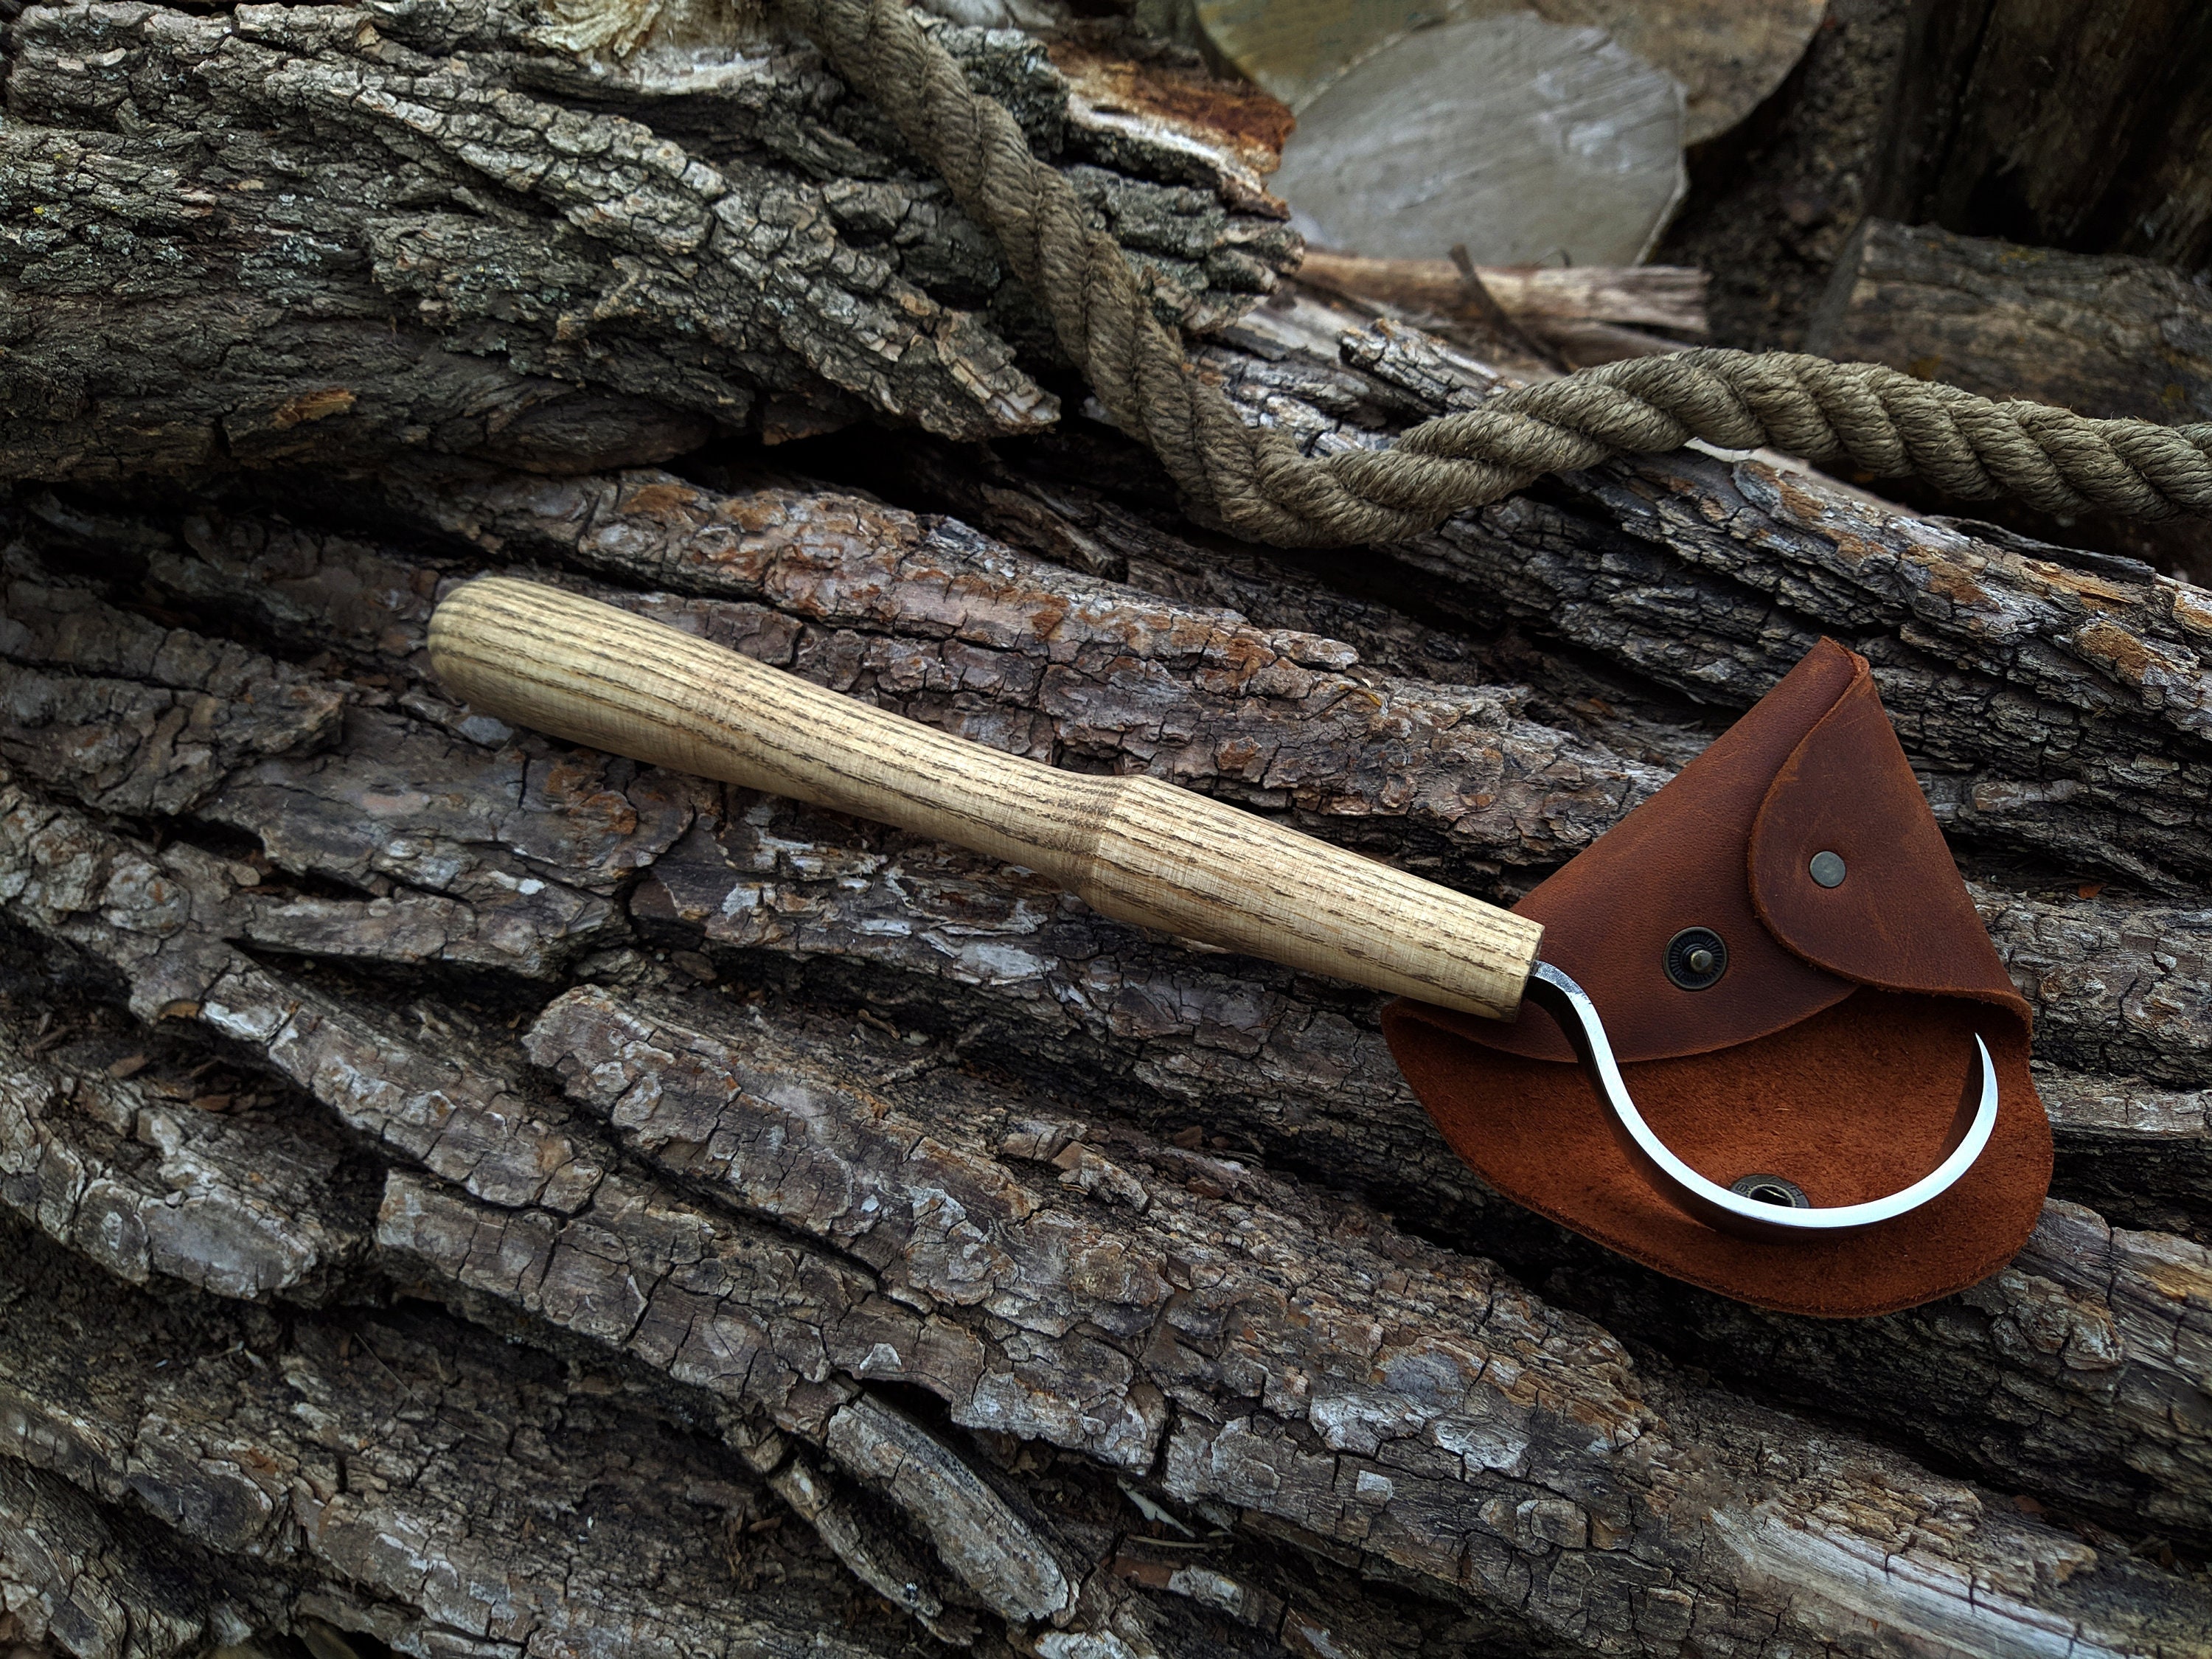 BeaverCraft Small Carving Axe with Leather Sheath